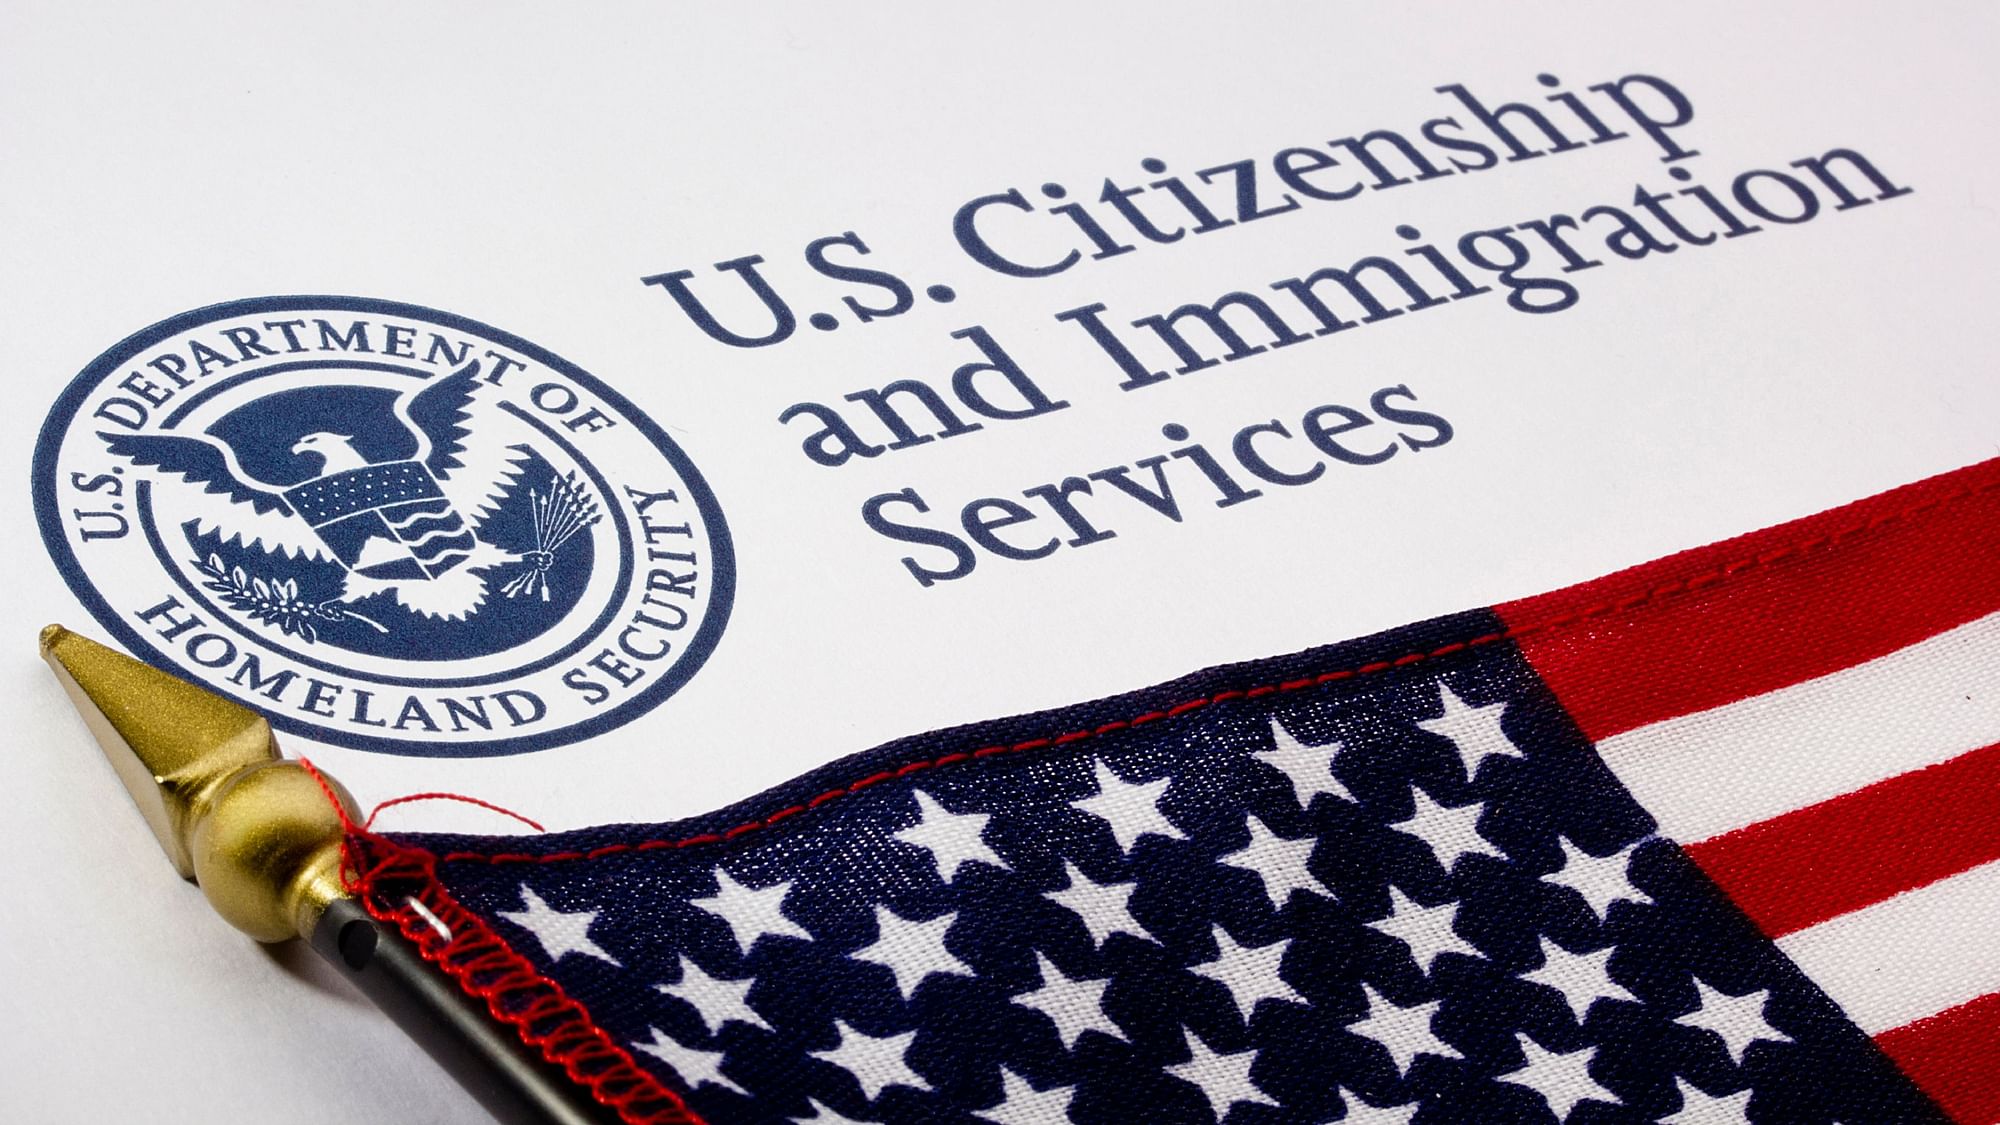 <div class="paragraphs"><p>Indians cornered nearly three-fourths of H-1B visas issued by the US to speciality foreign workers in 2021, continuing their stronghold on this highly sought-after professional ticket to work, live and, finally, settle down in America.</p></div>